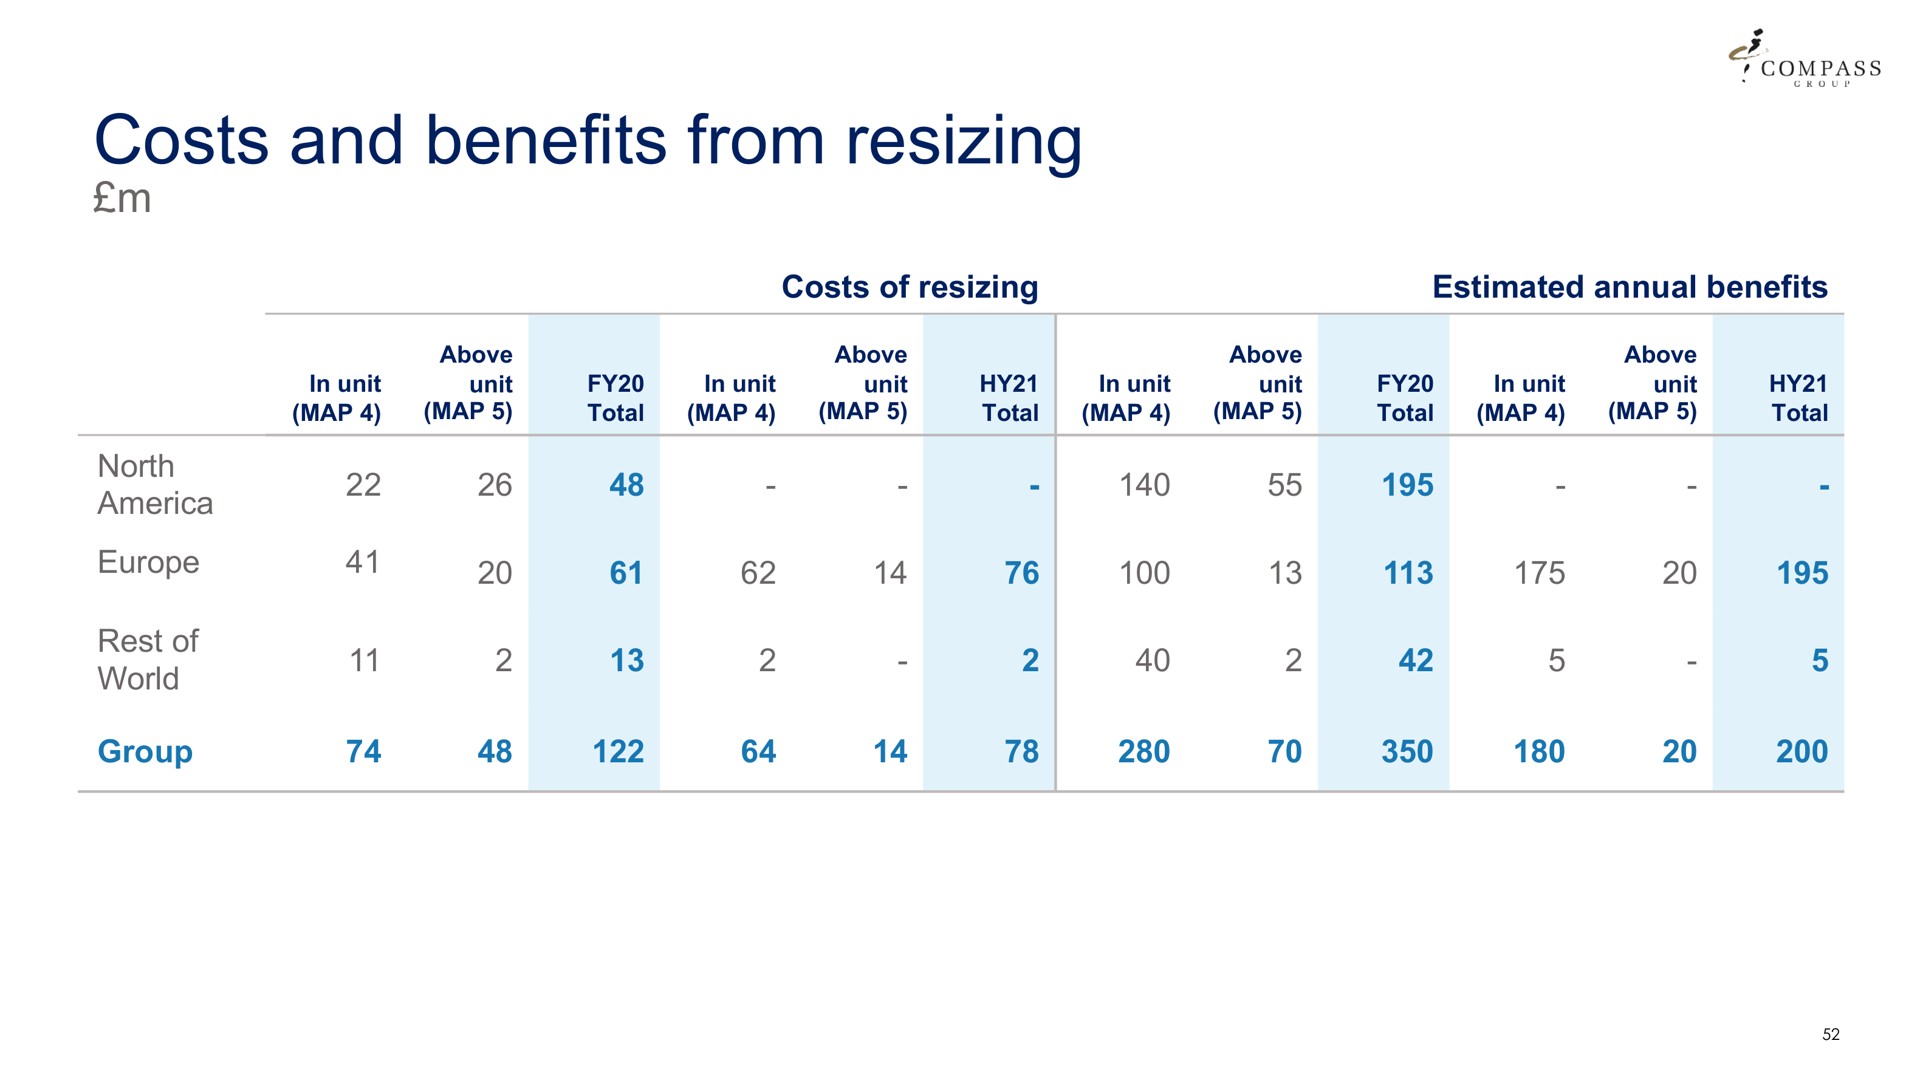 costs and benefits from resizing | Compass Group